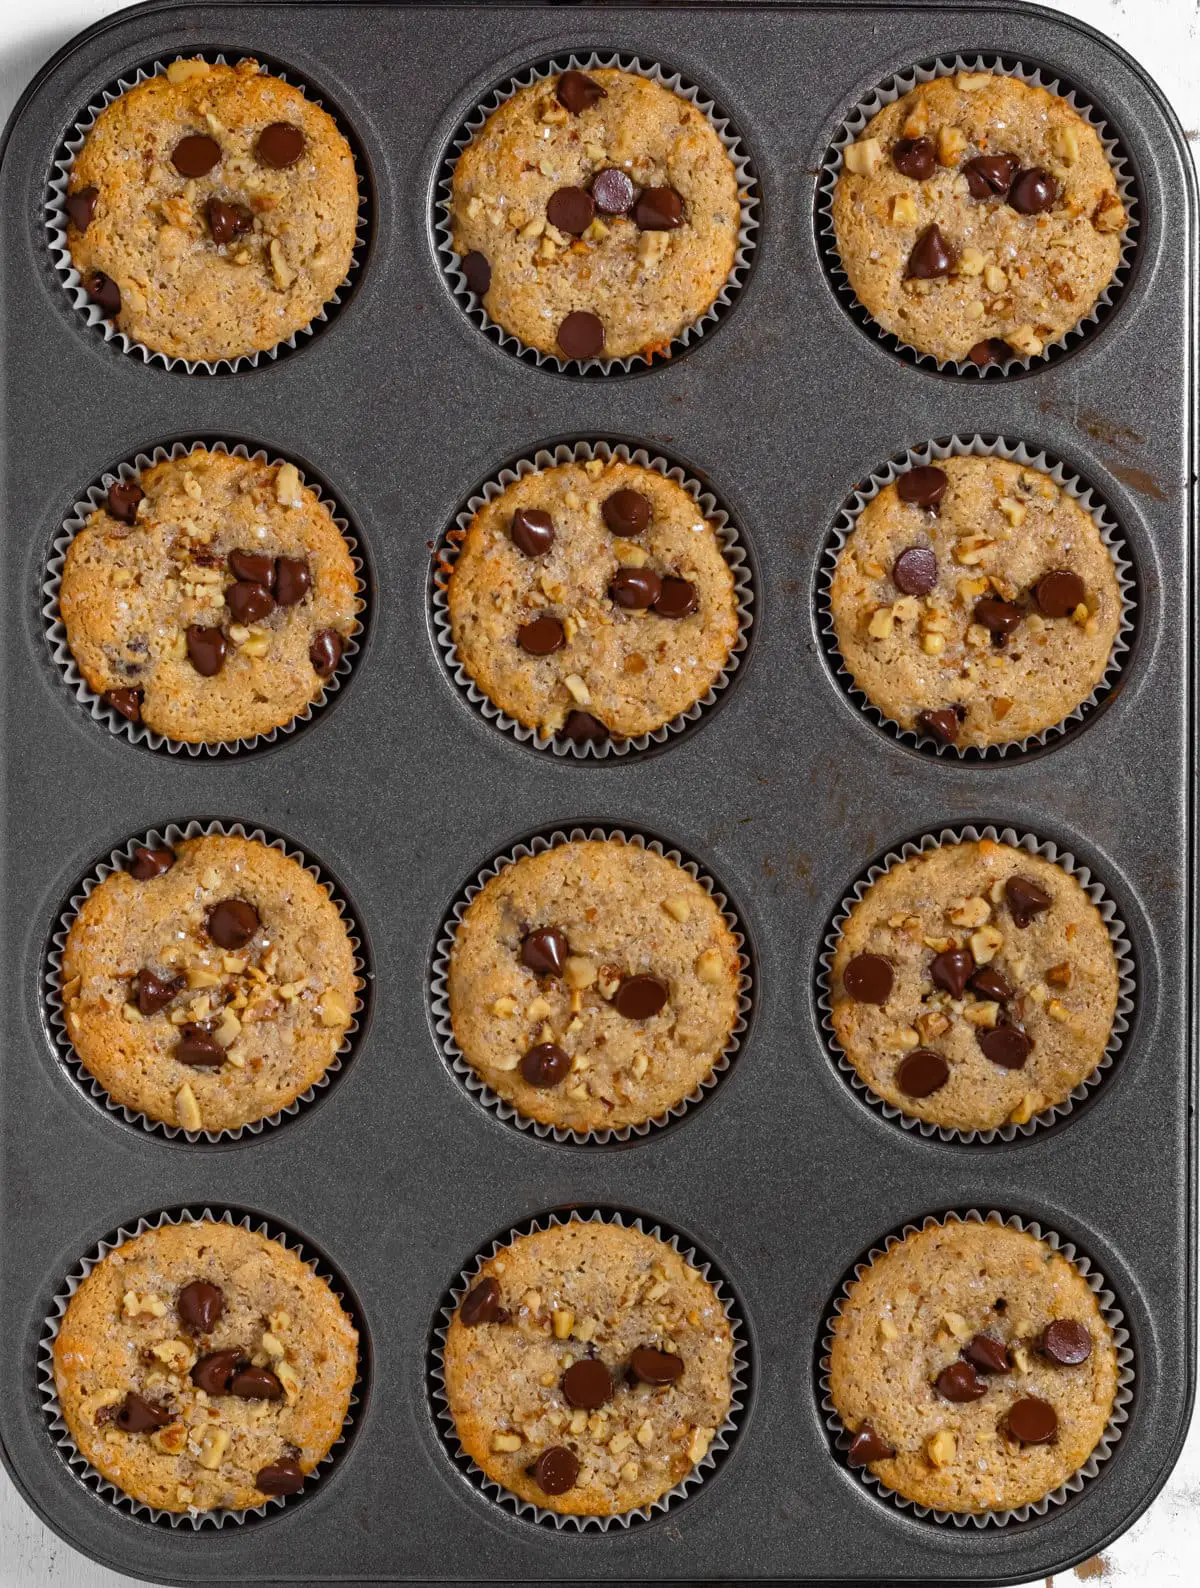 muffins baked